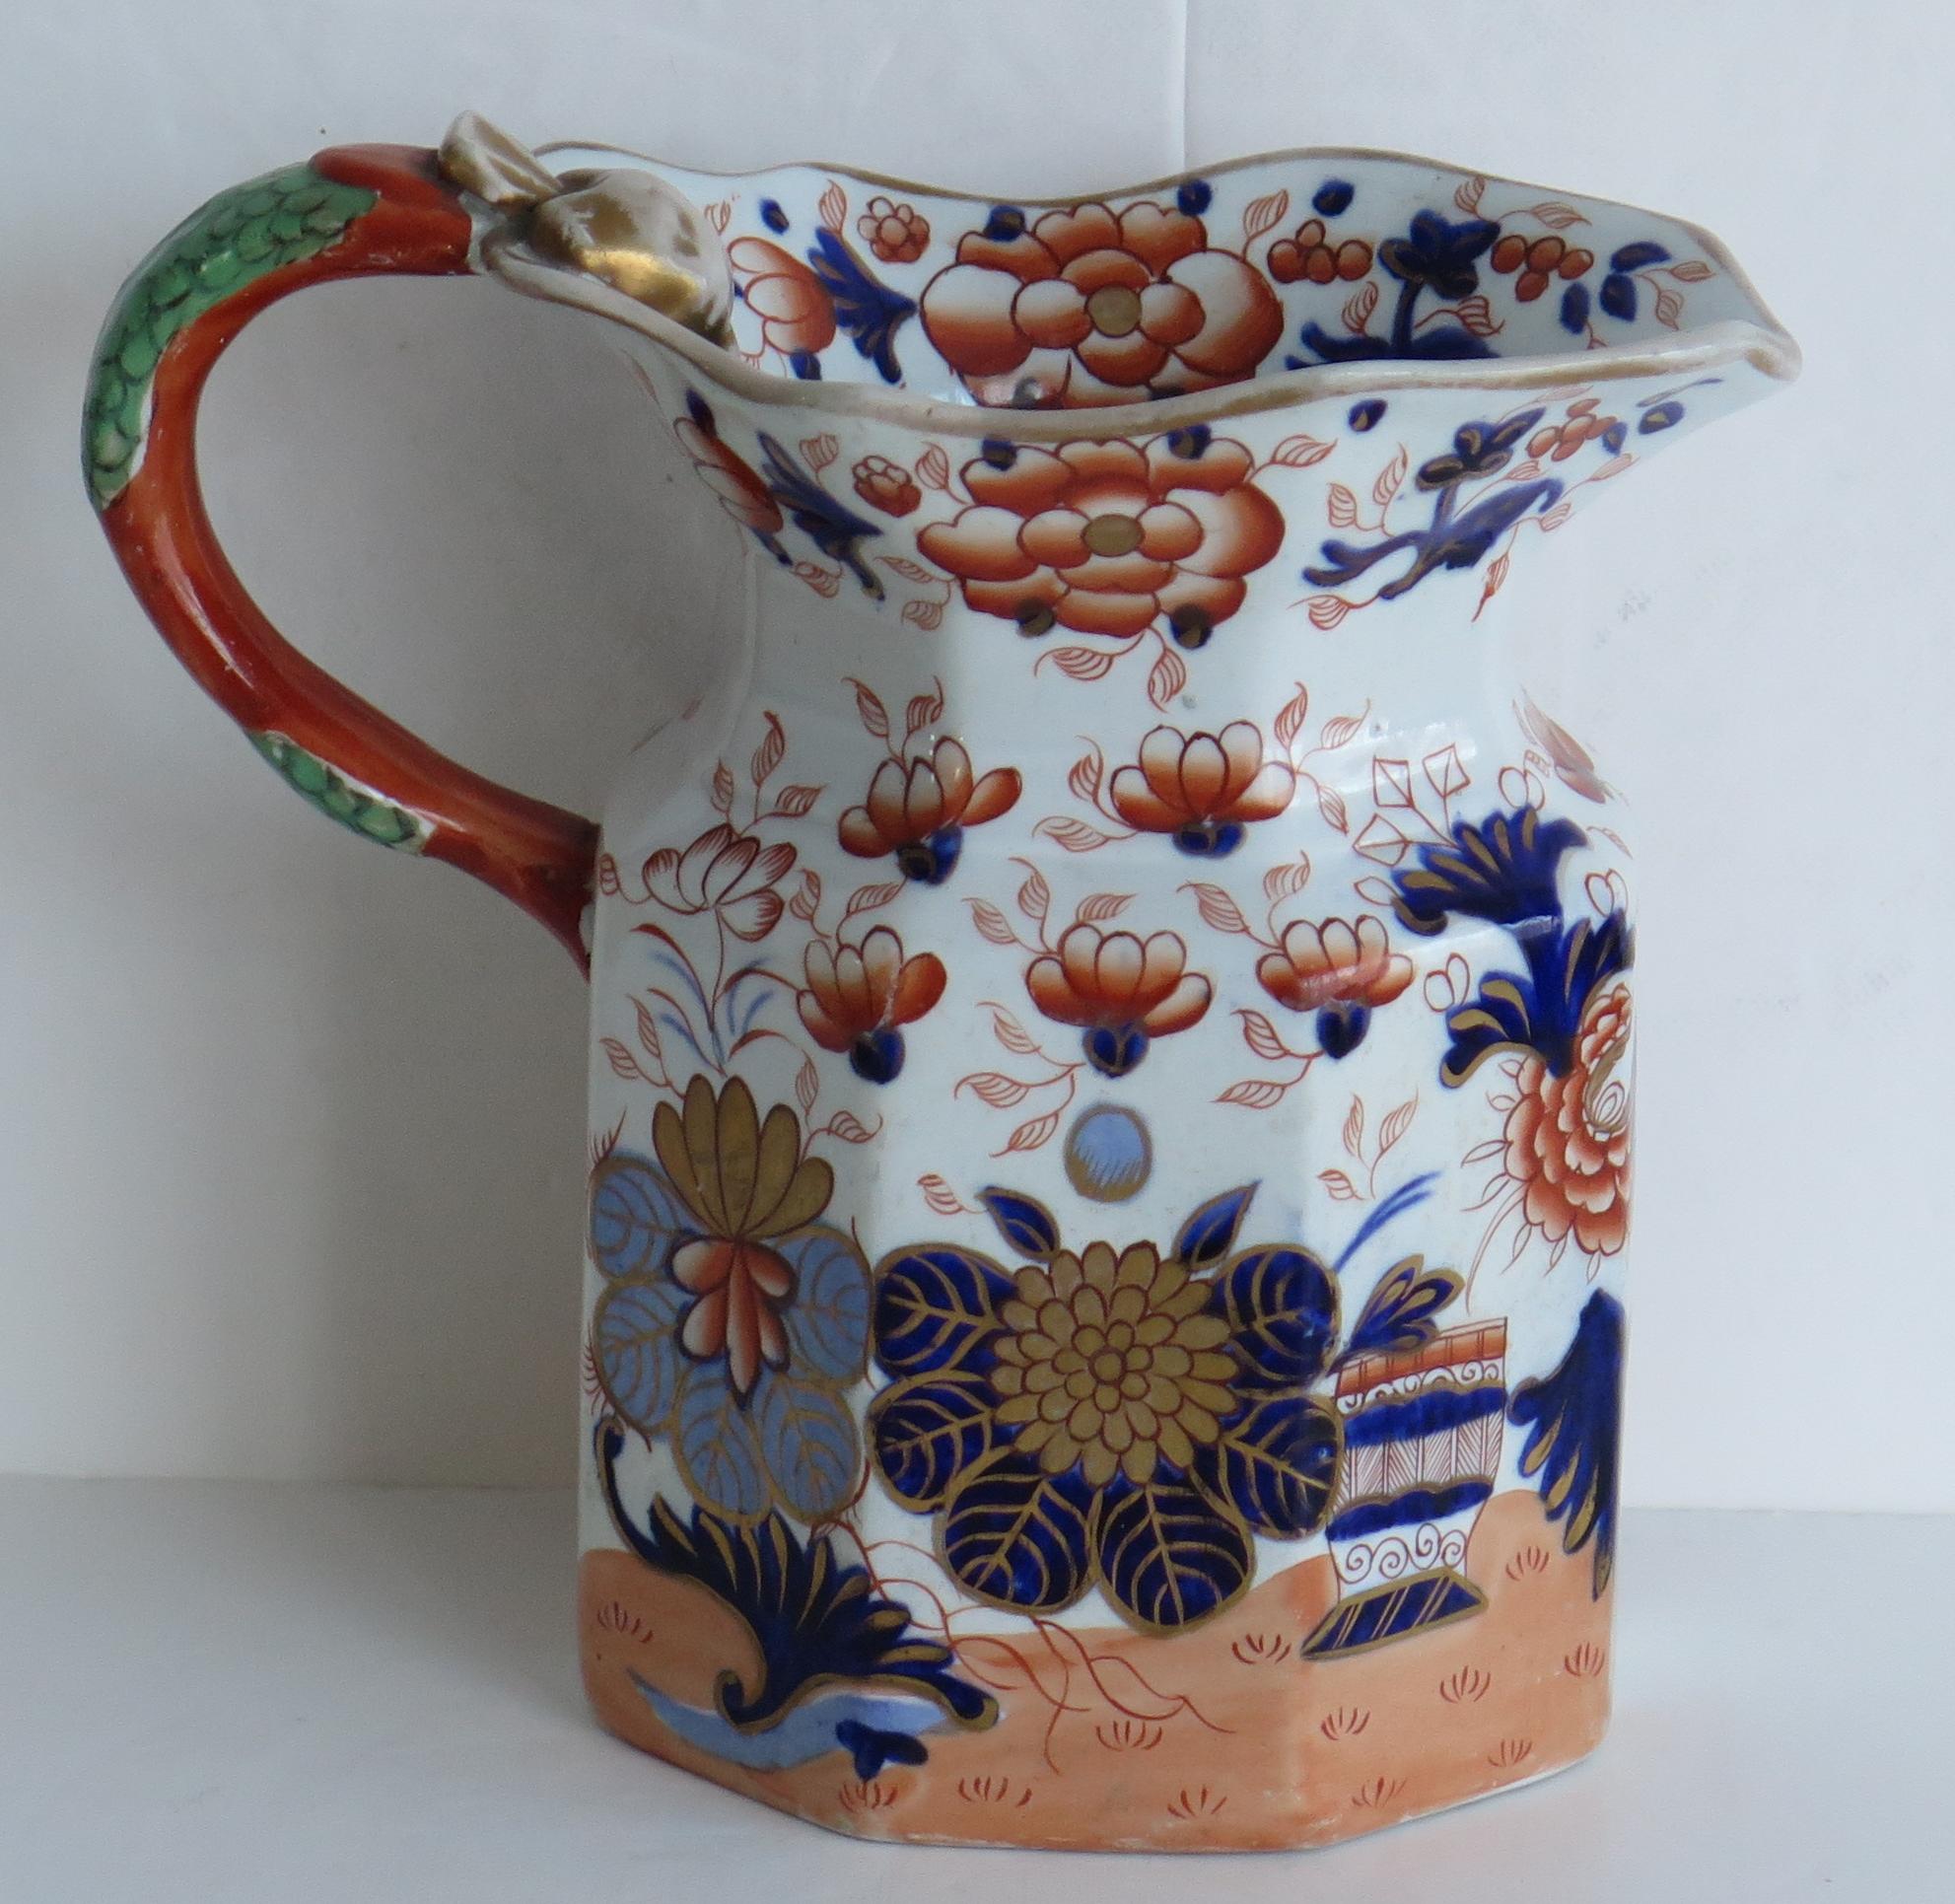 Hand-Painted Fine Mason's Ironstone Jug or Pitcher in Gilded Basket Japan Pat'n, Circa 1835